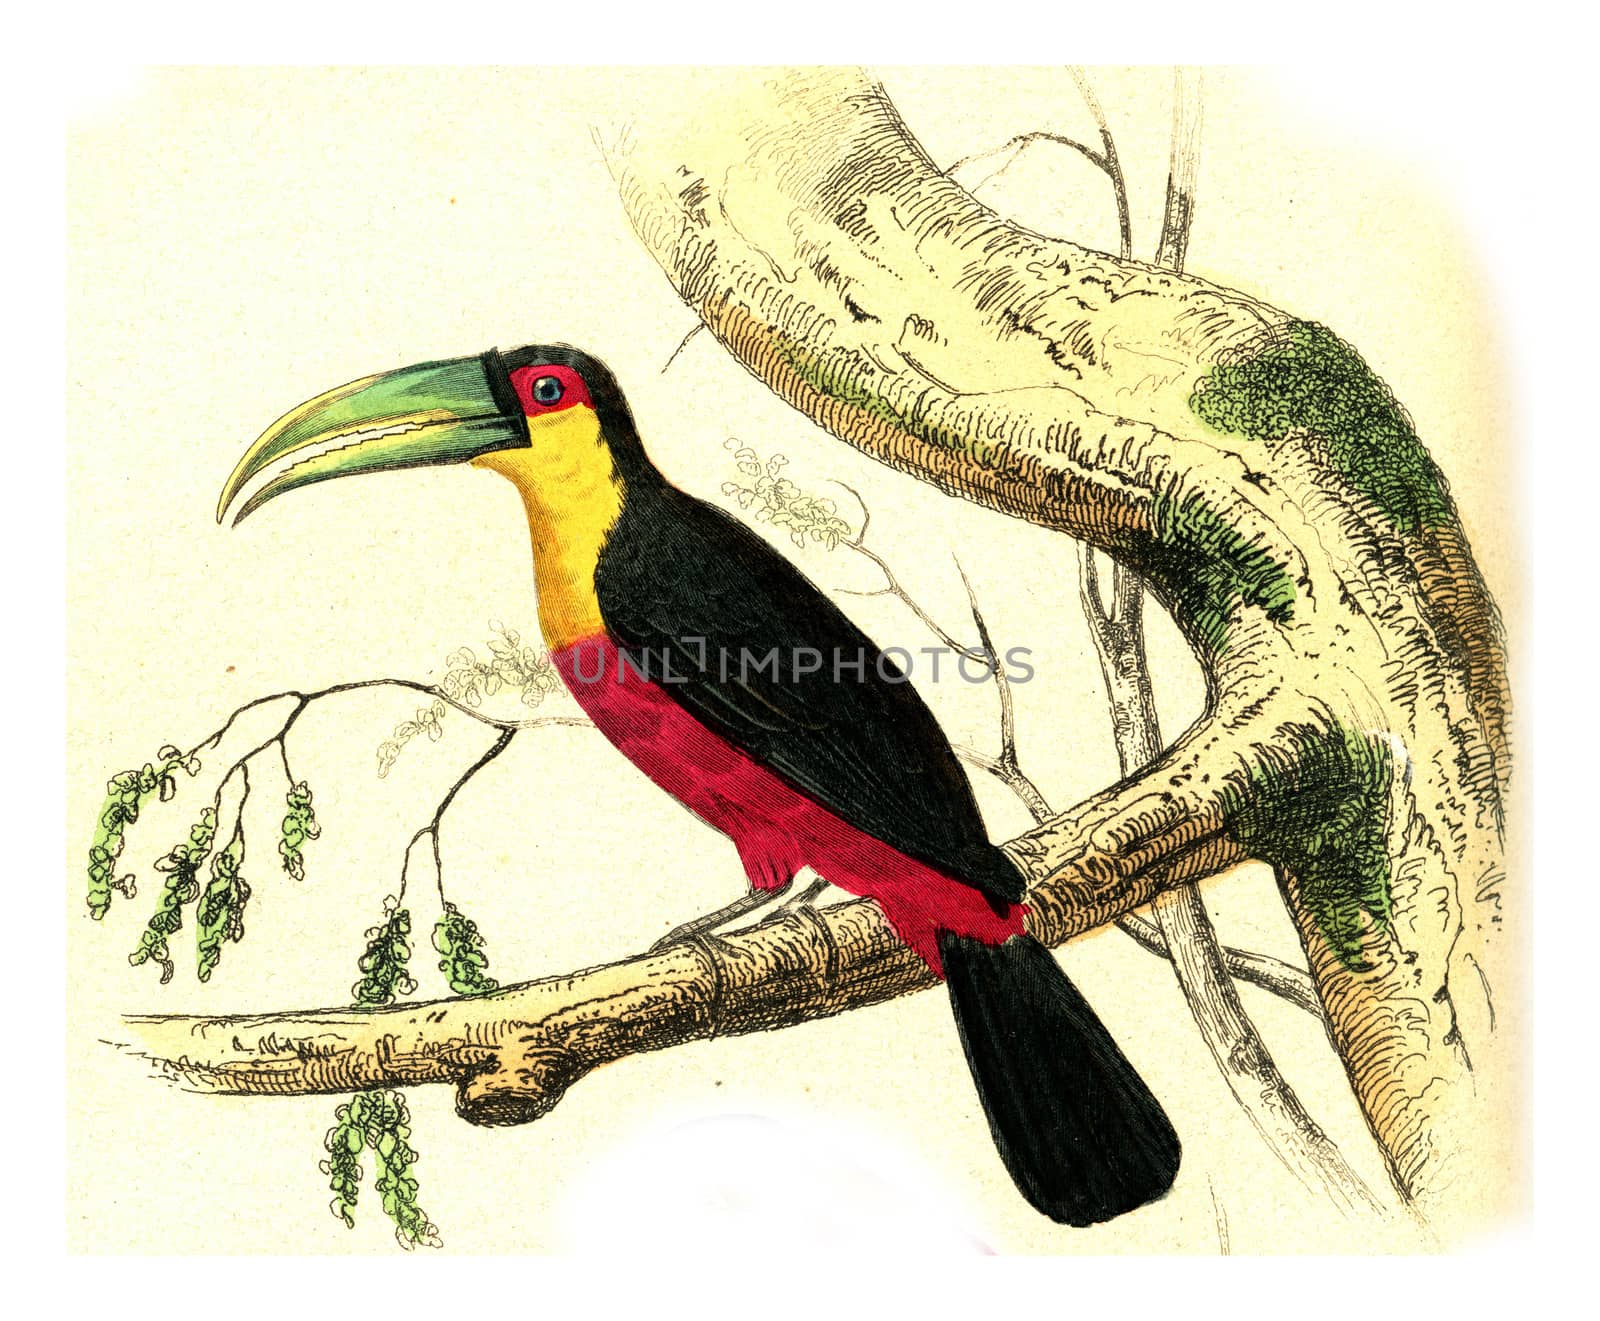 The Toucan has a red belly, vintage engraving. by Morphart